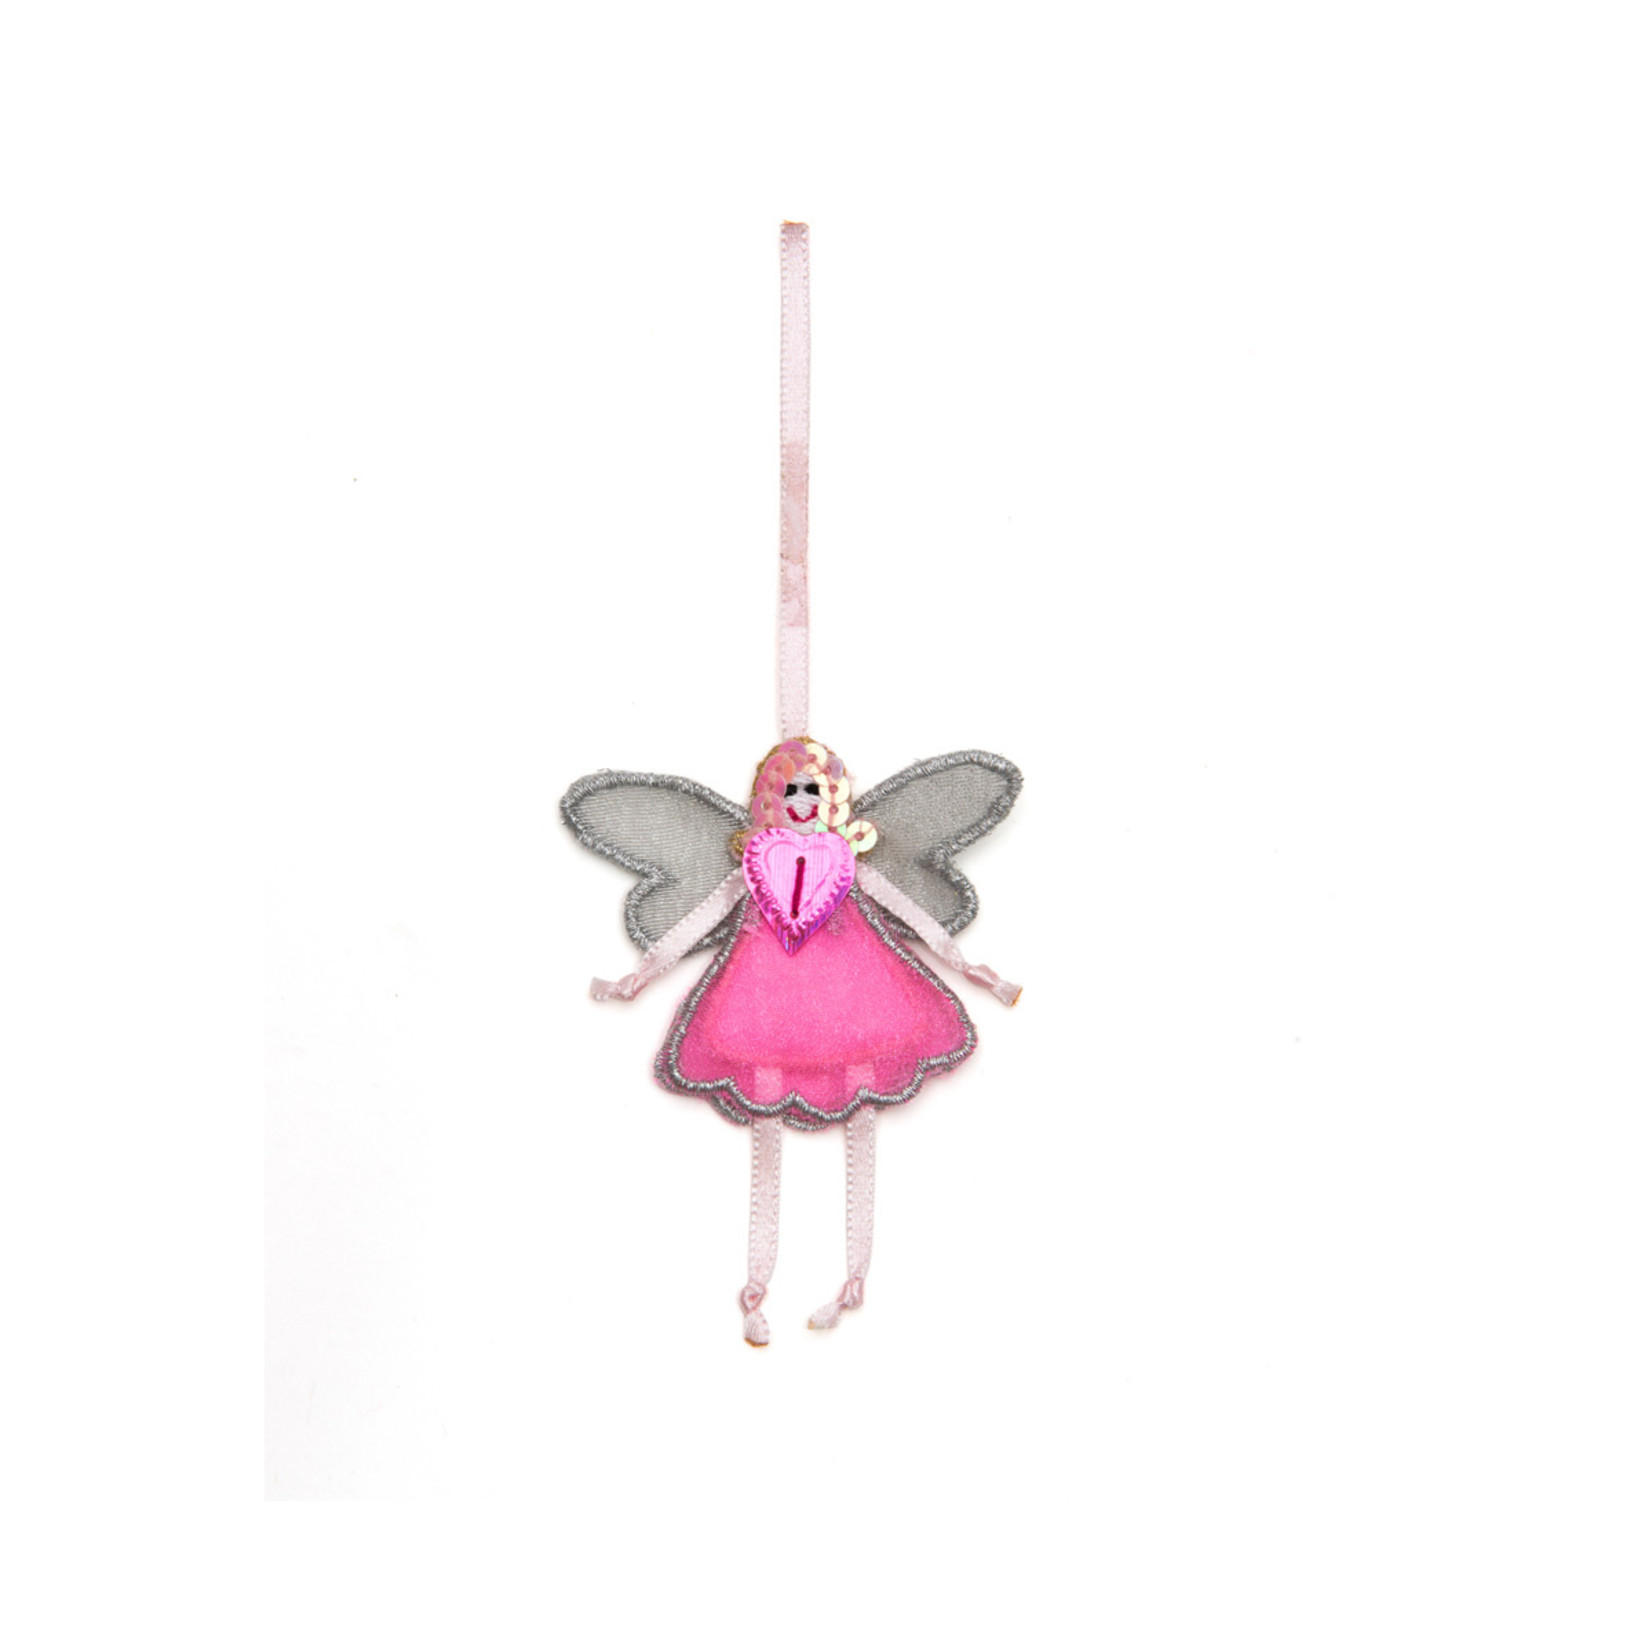 Believe You Can Have a Fairy Fabulous Day - Greeting Card